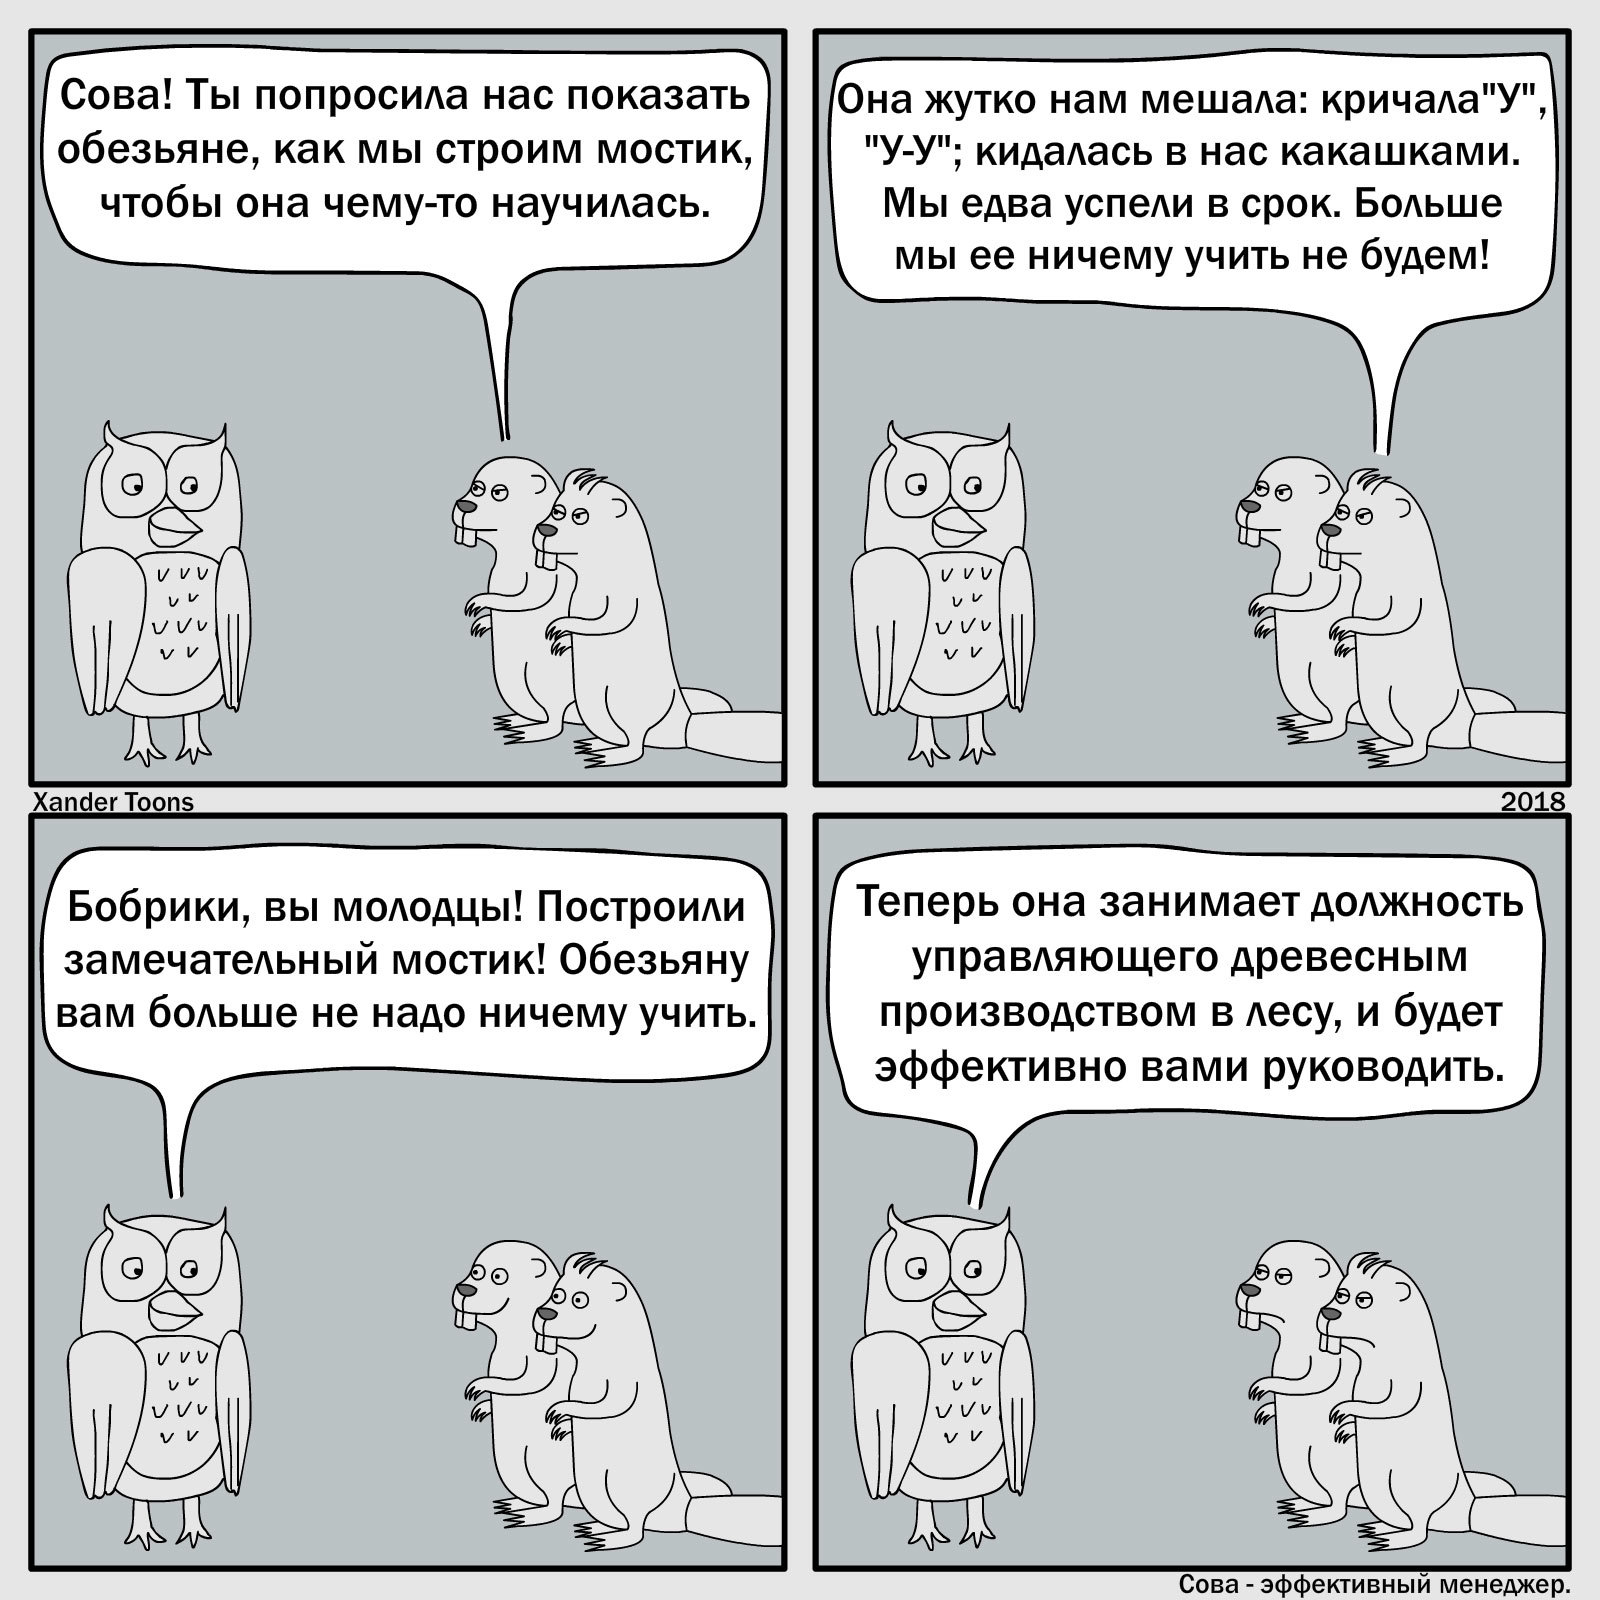 New effective manager. - My, Comics, Drawing, Owl is an effective manager, Owl, Beavers, Manager, Humor